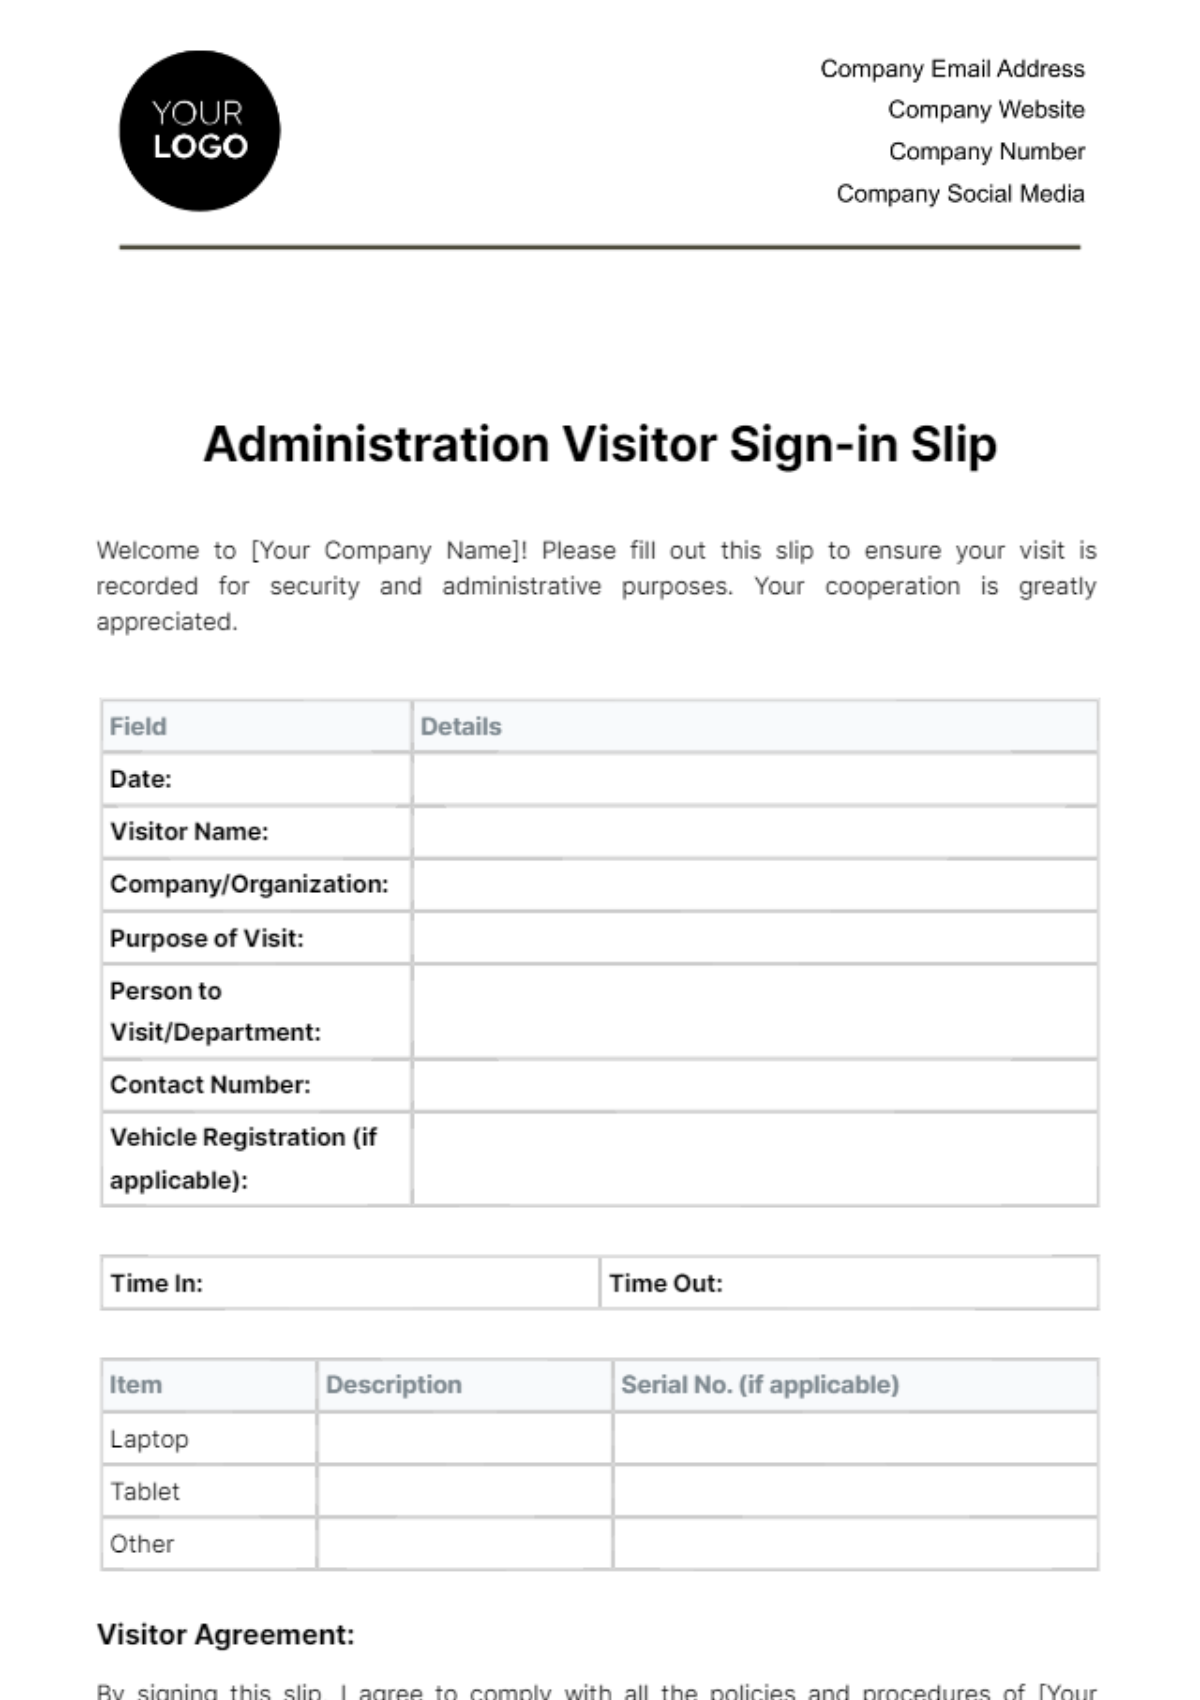 Free Administration Visitor Sign-in Slip Template